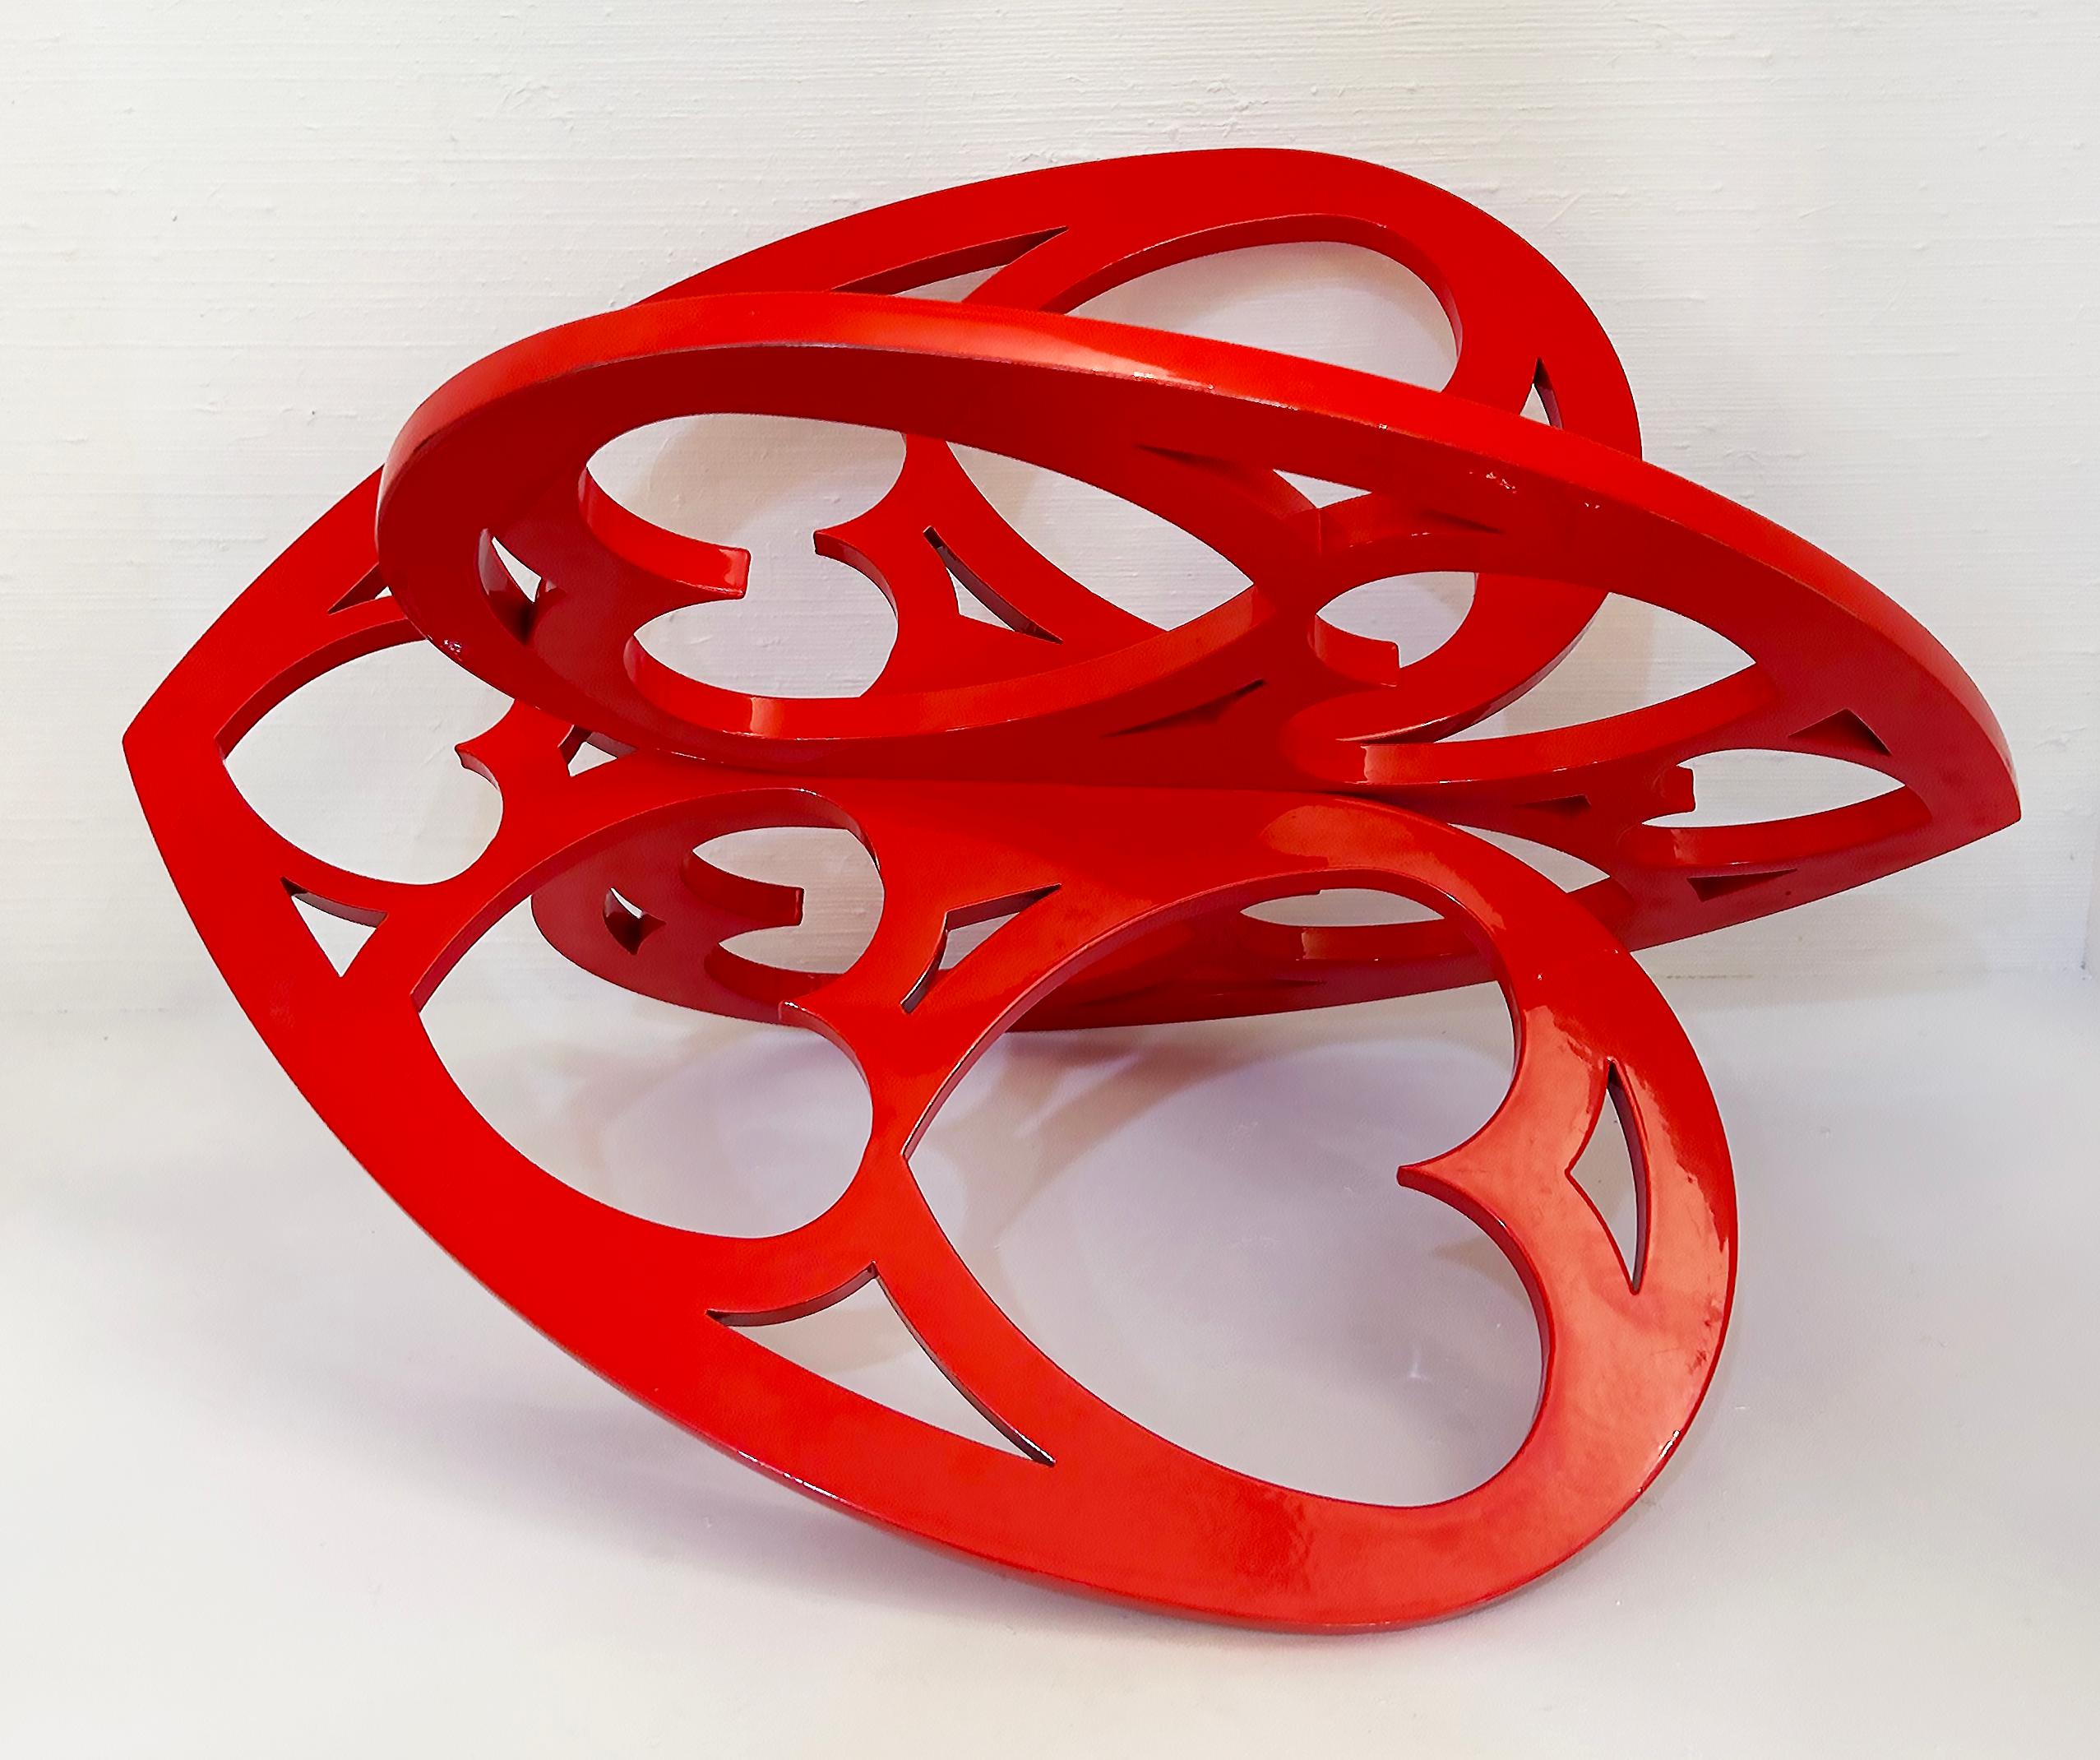 American Interlocking Hearts Powder-coated Aluminum Lace Sculpture by Michael Gitter For Sale